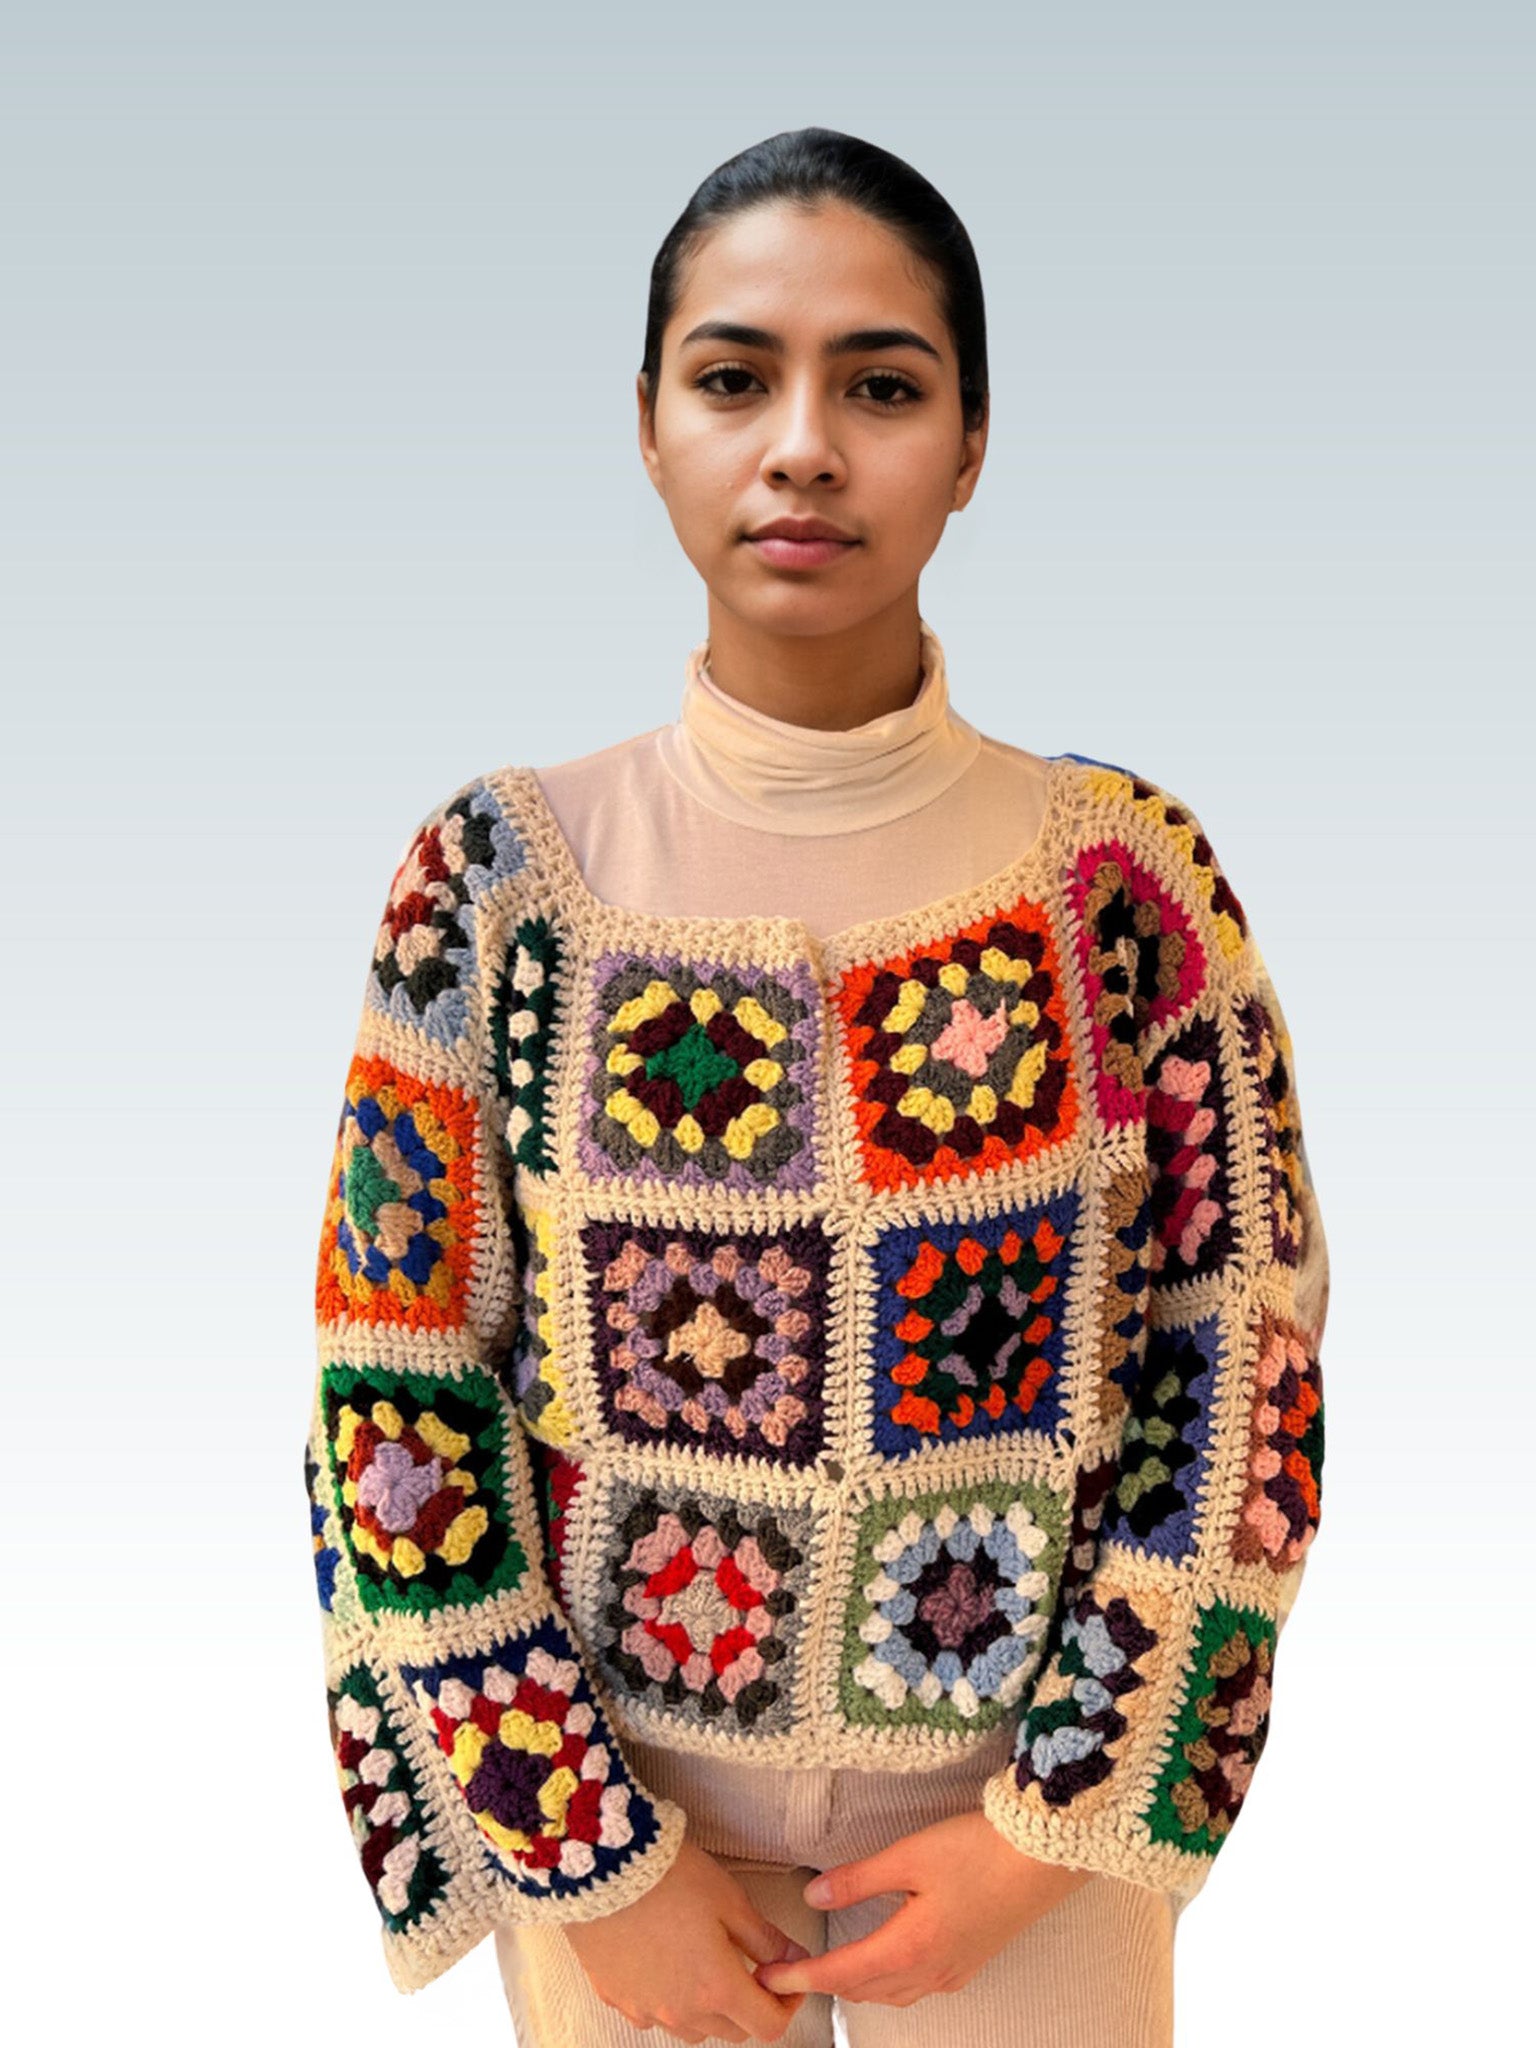 Quilt-Inspired Kaleidoscope Patch Sweater